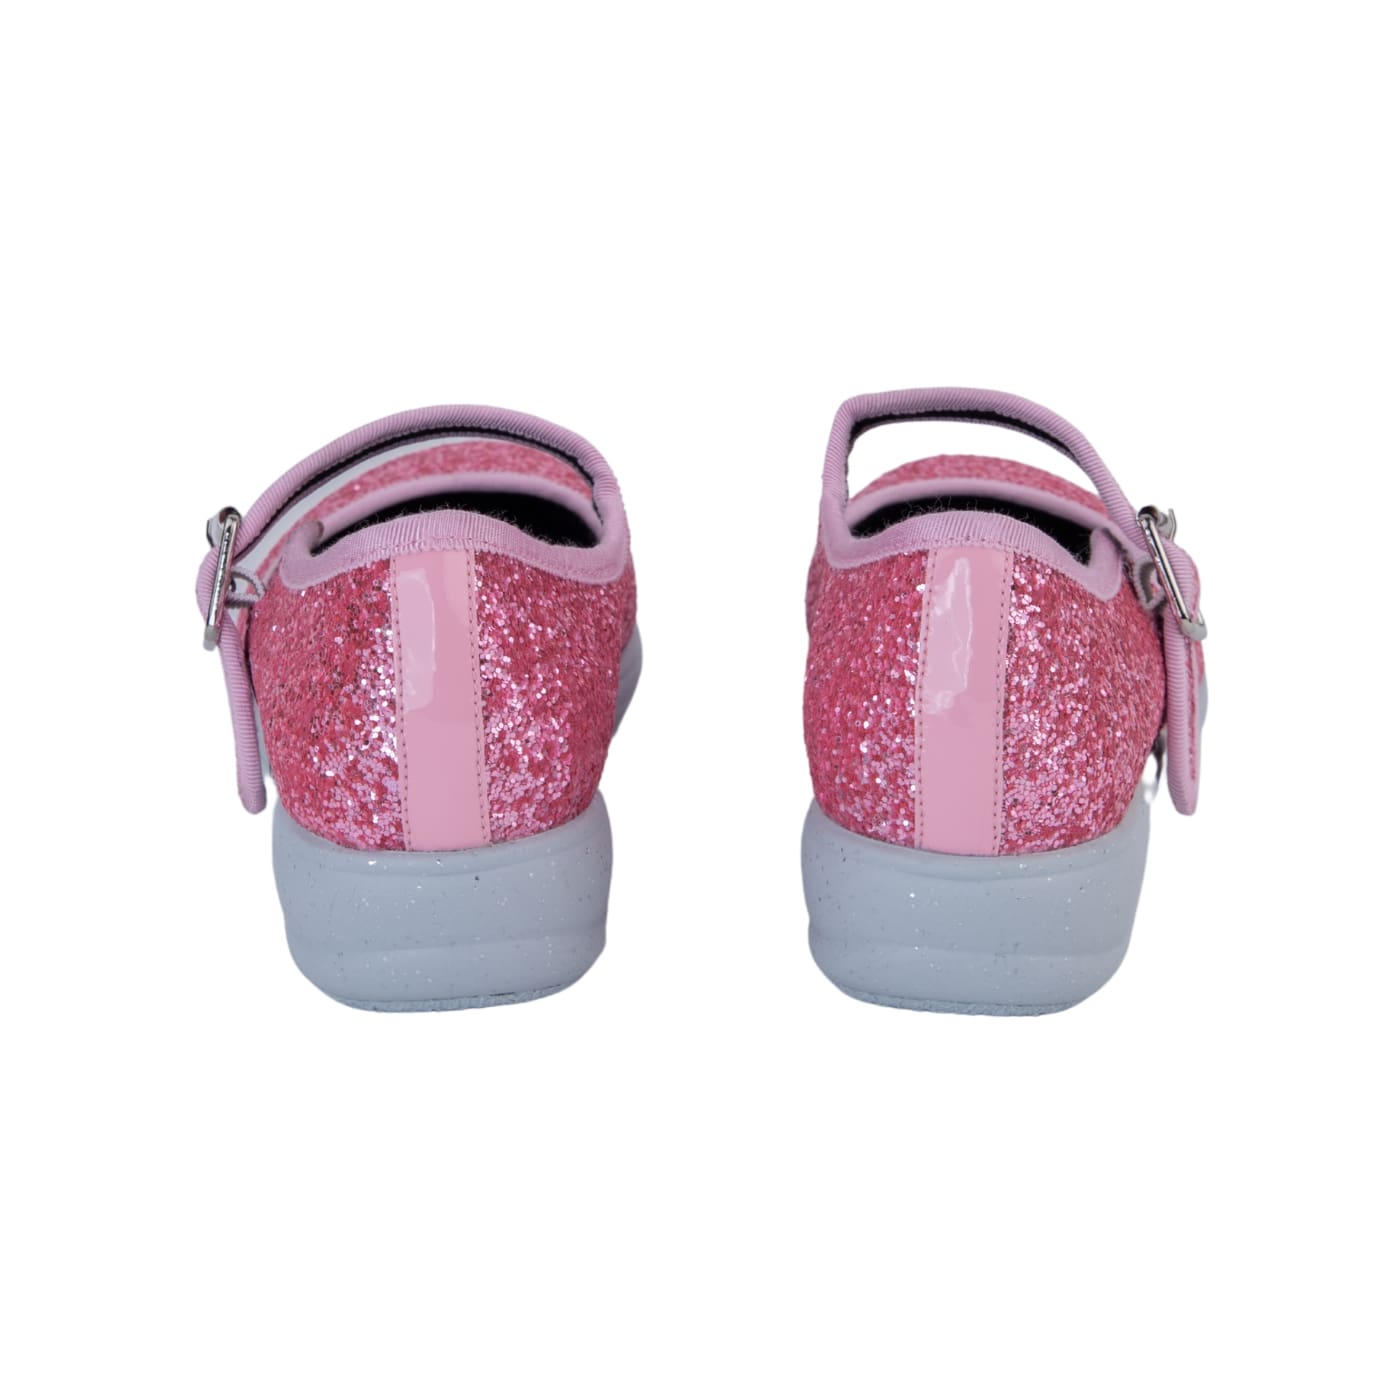 Fairy Floss Mary Janes by RainbowsAndFairies.com.au (Pink Glitter - Glitter Soles - Mismatched Shoes - Glitter Shoes - Sparkle) - SKU: FW_MARYJ_FRYFL_ORG - Pic-05